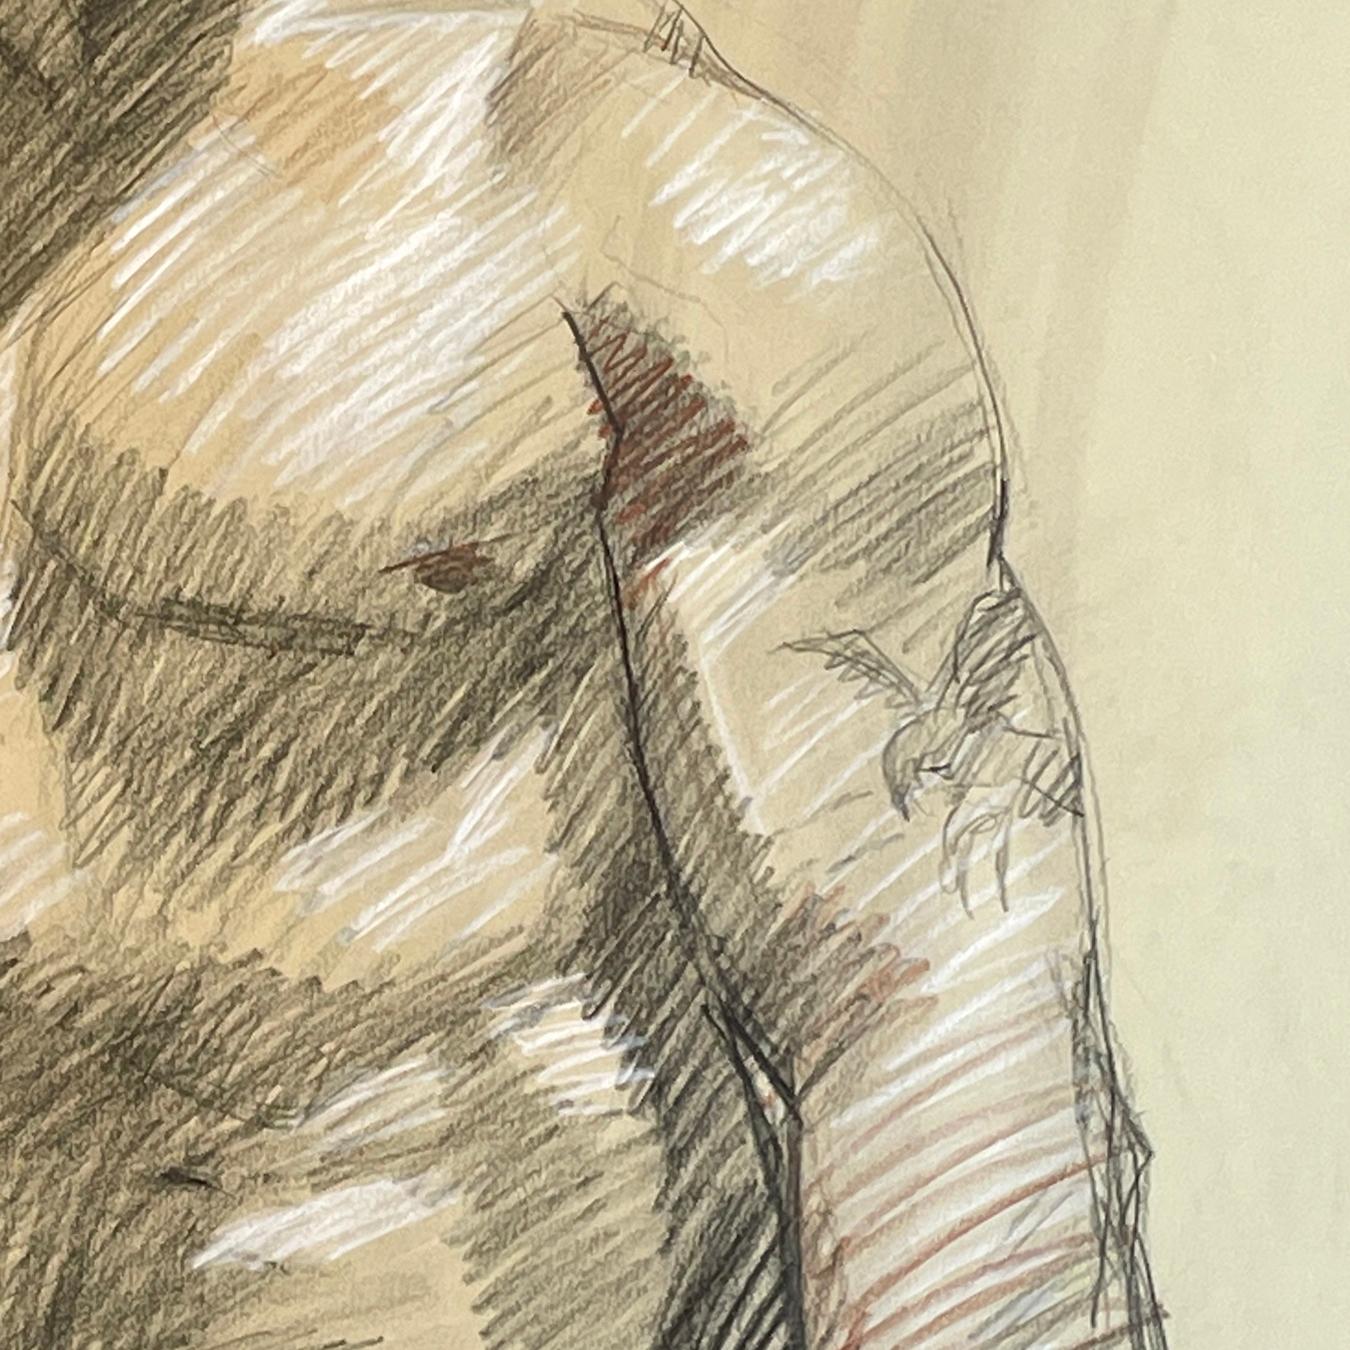 MB 80 (Figurative Life Drawing of Handsome Male Nude by Mark Beard)  1